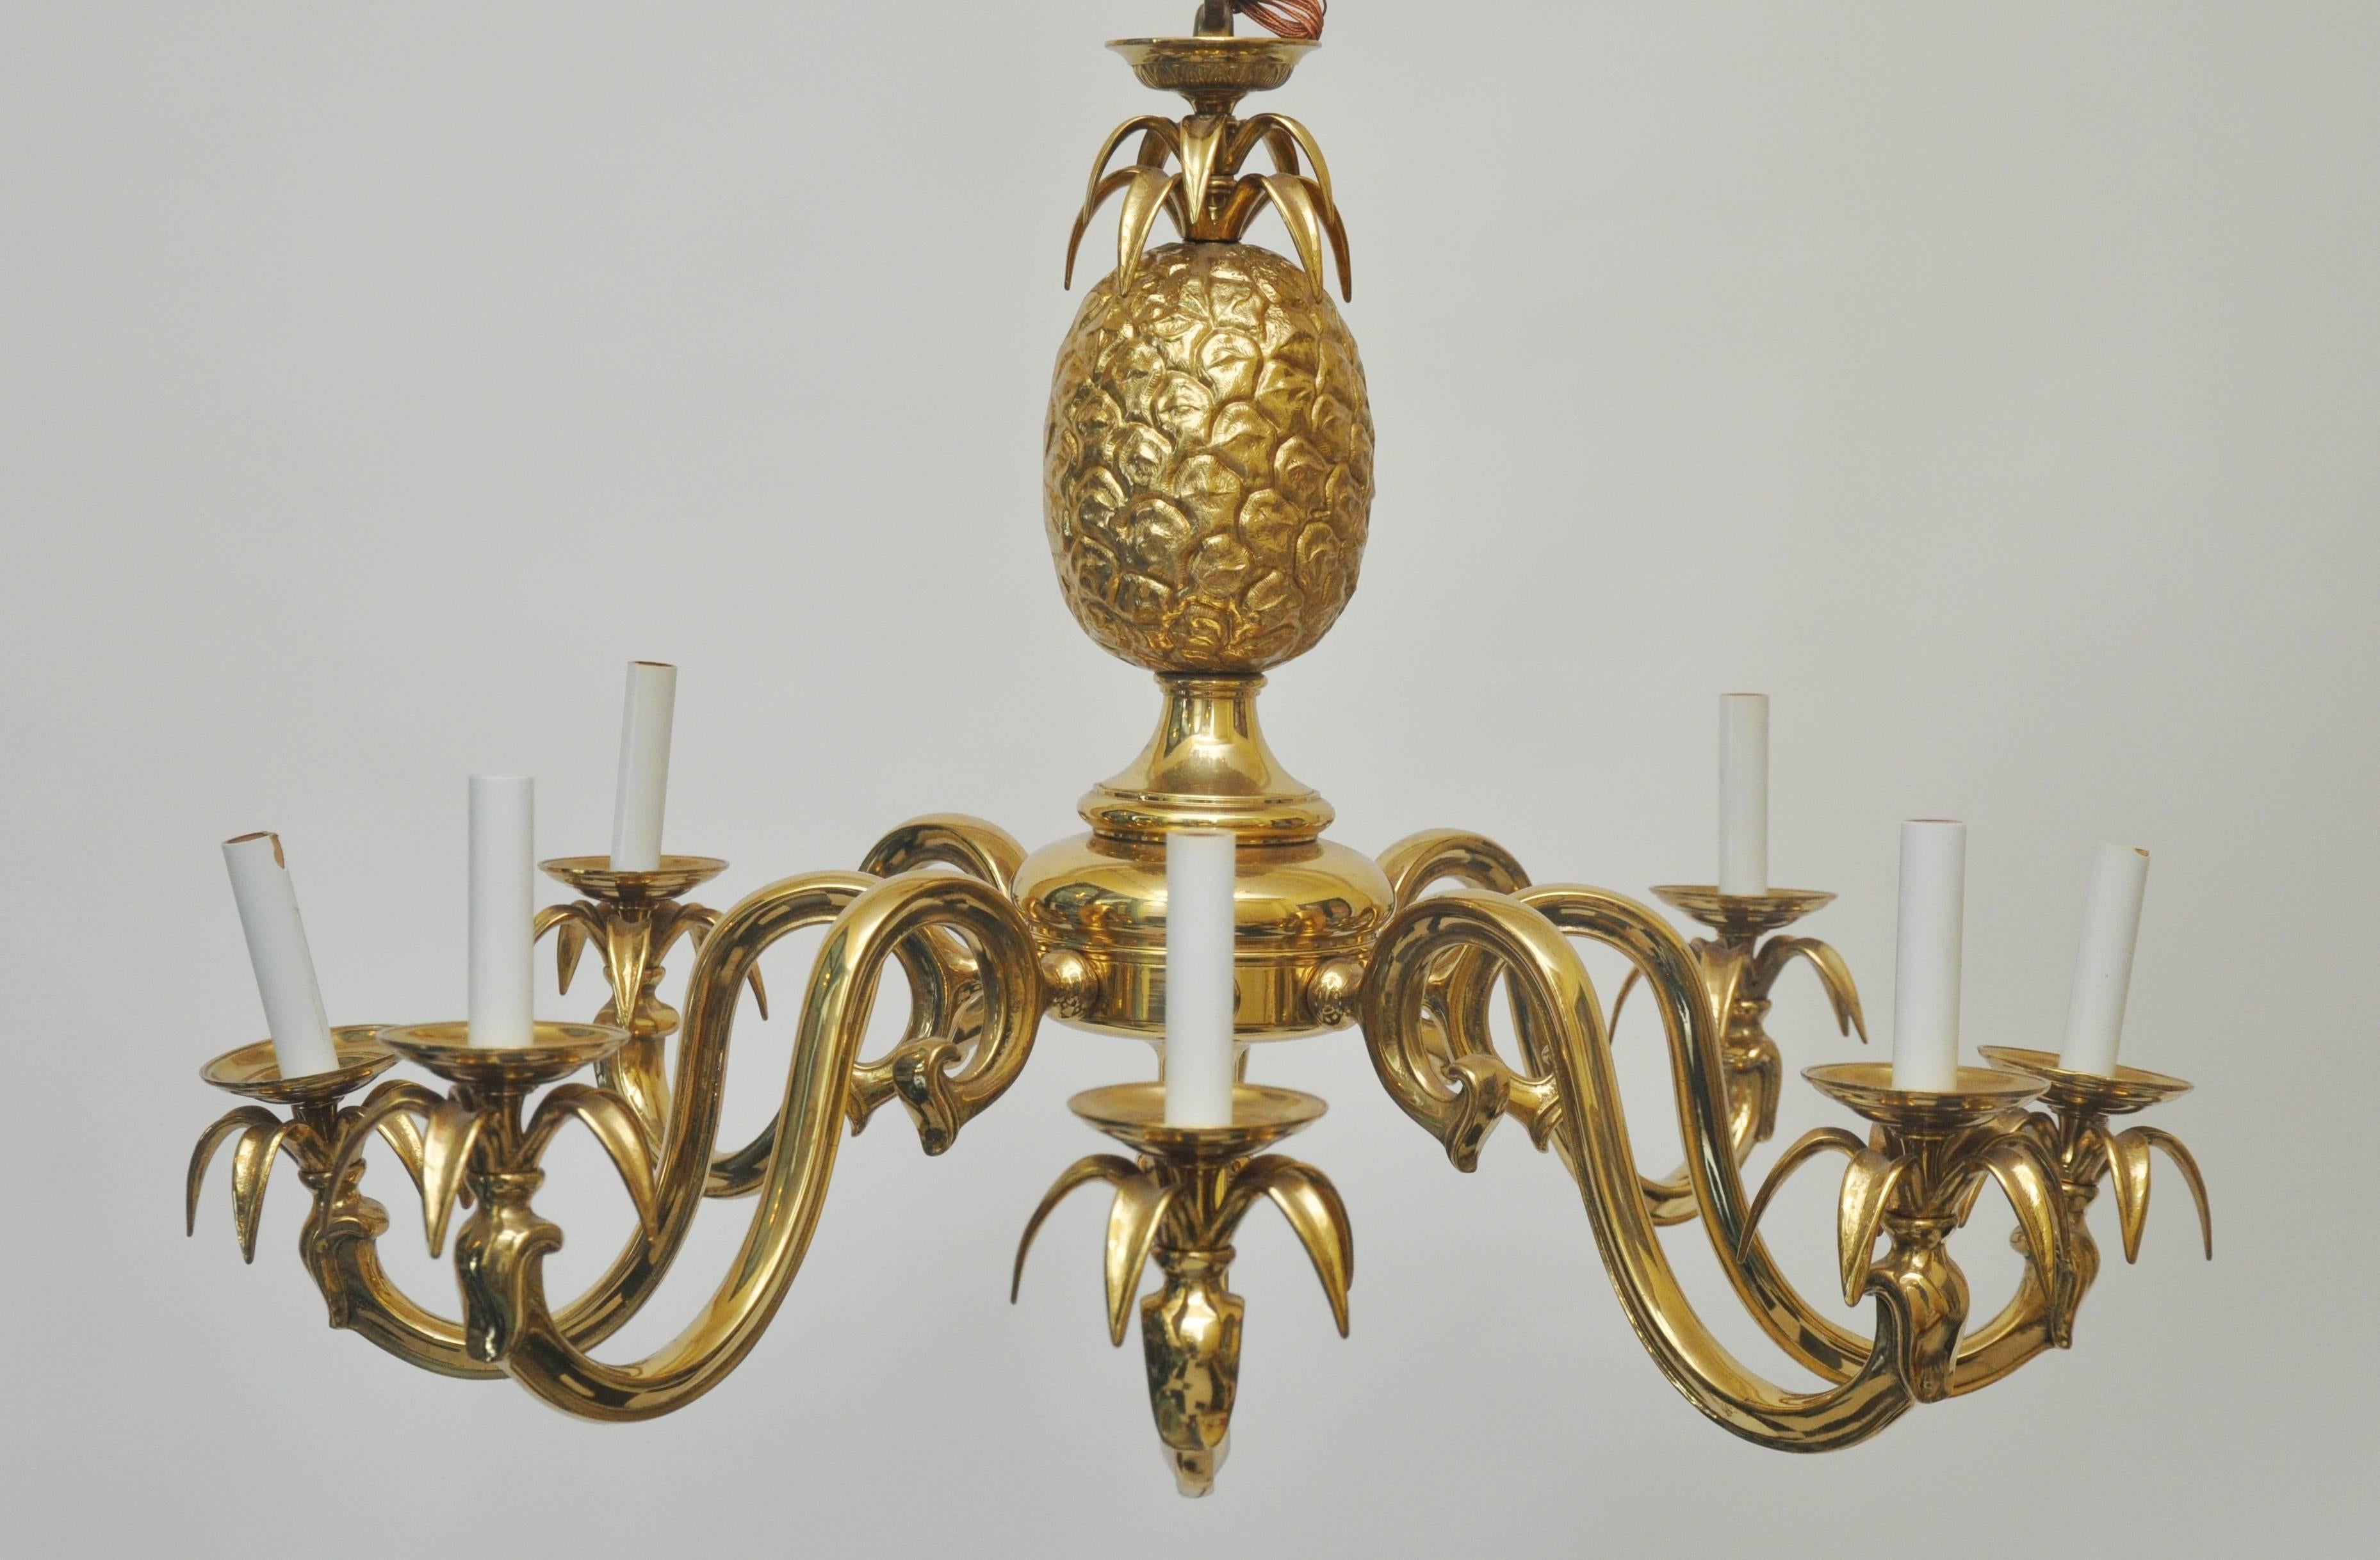 Beautiful solid brass pineapple chandelier. Made in Italy in the 1970s. Heavy brass light. Eight lights. Measures: 34" diameter also has a matching canopy and 15" of matching chain. Wired ad ready to hang.